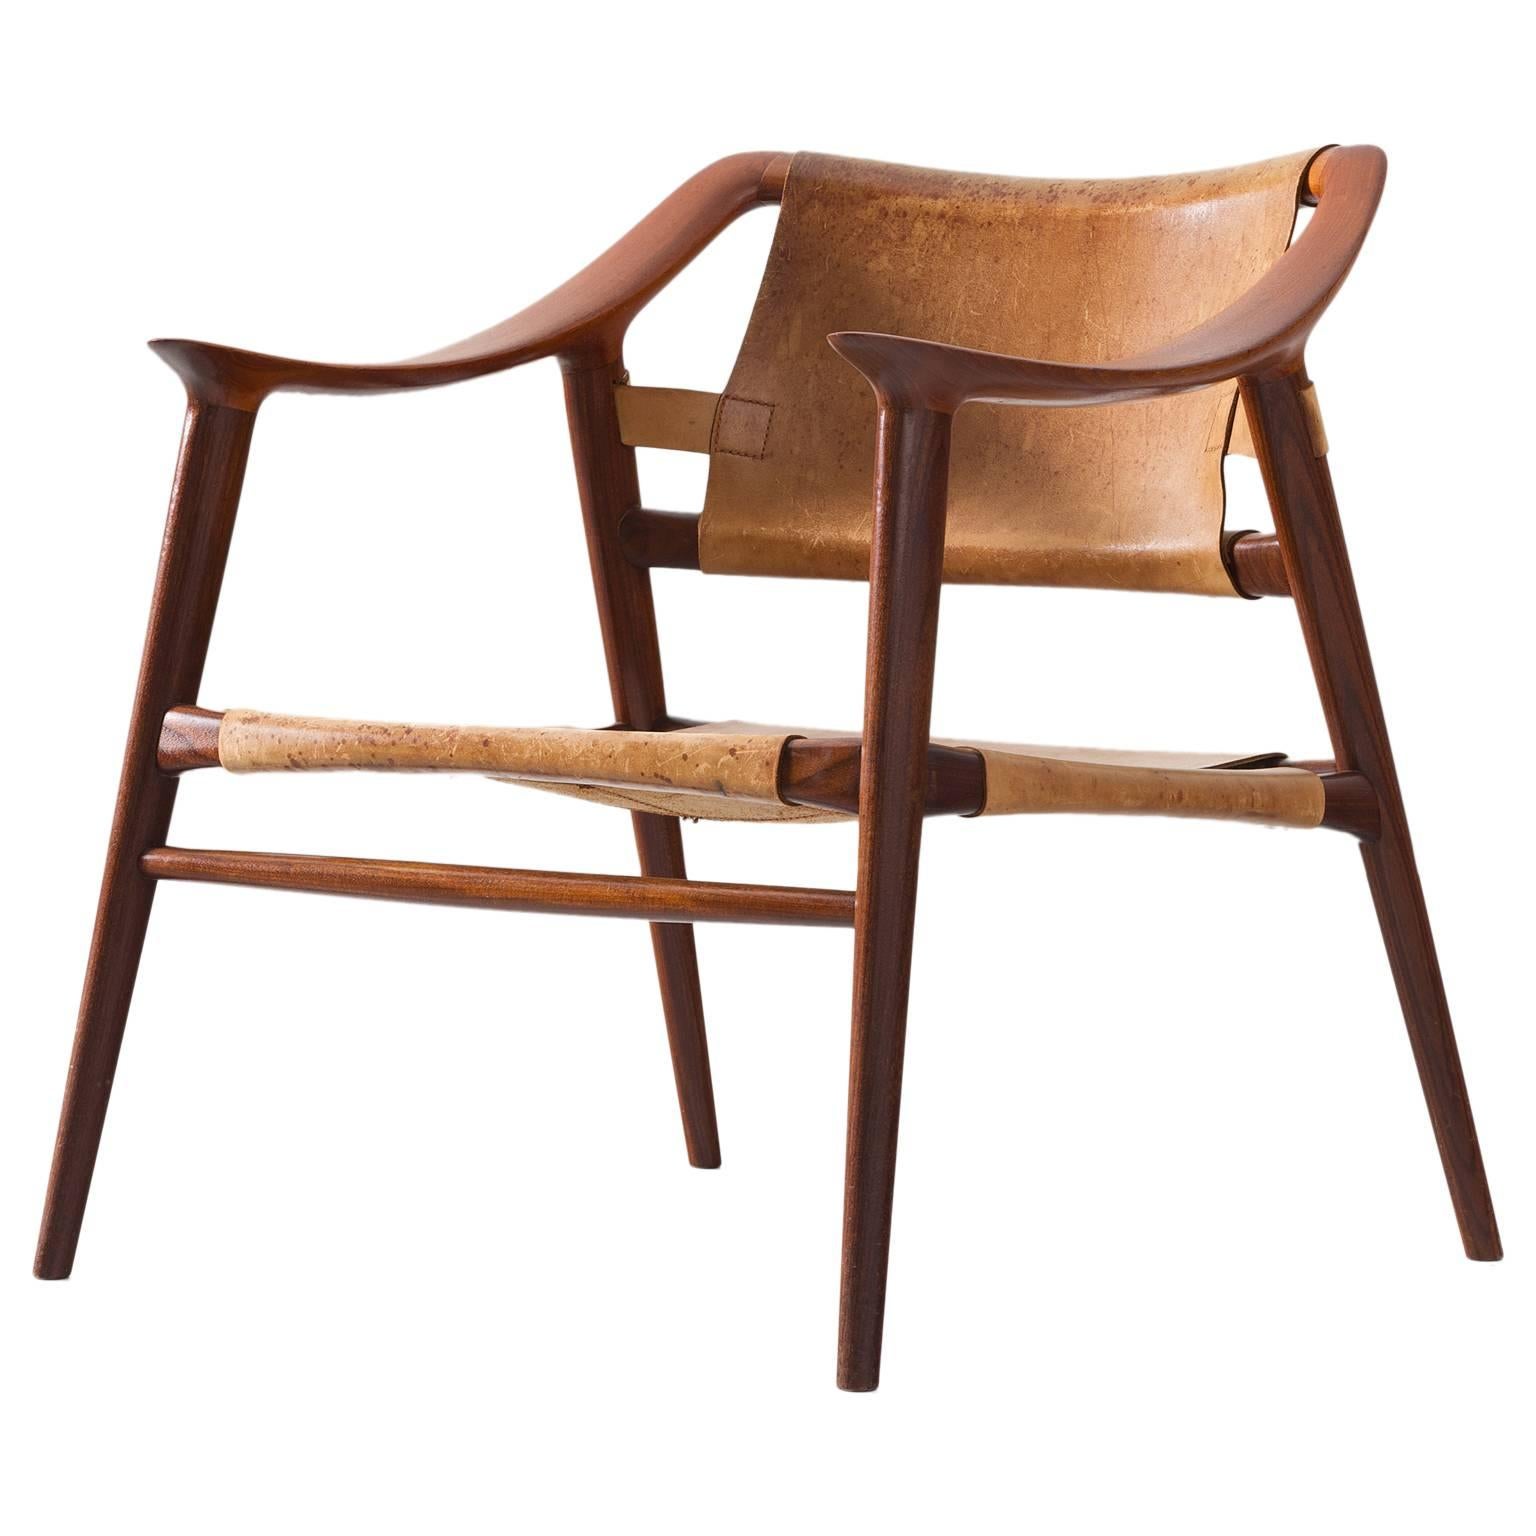 Rastad & Relling 'Bambi' Armchair in Teak and Cognac Leather